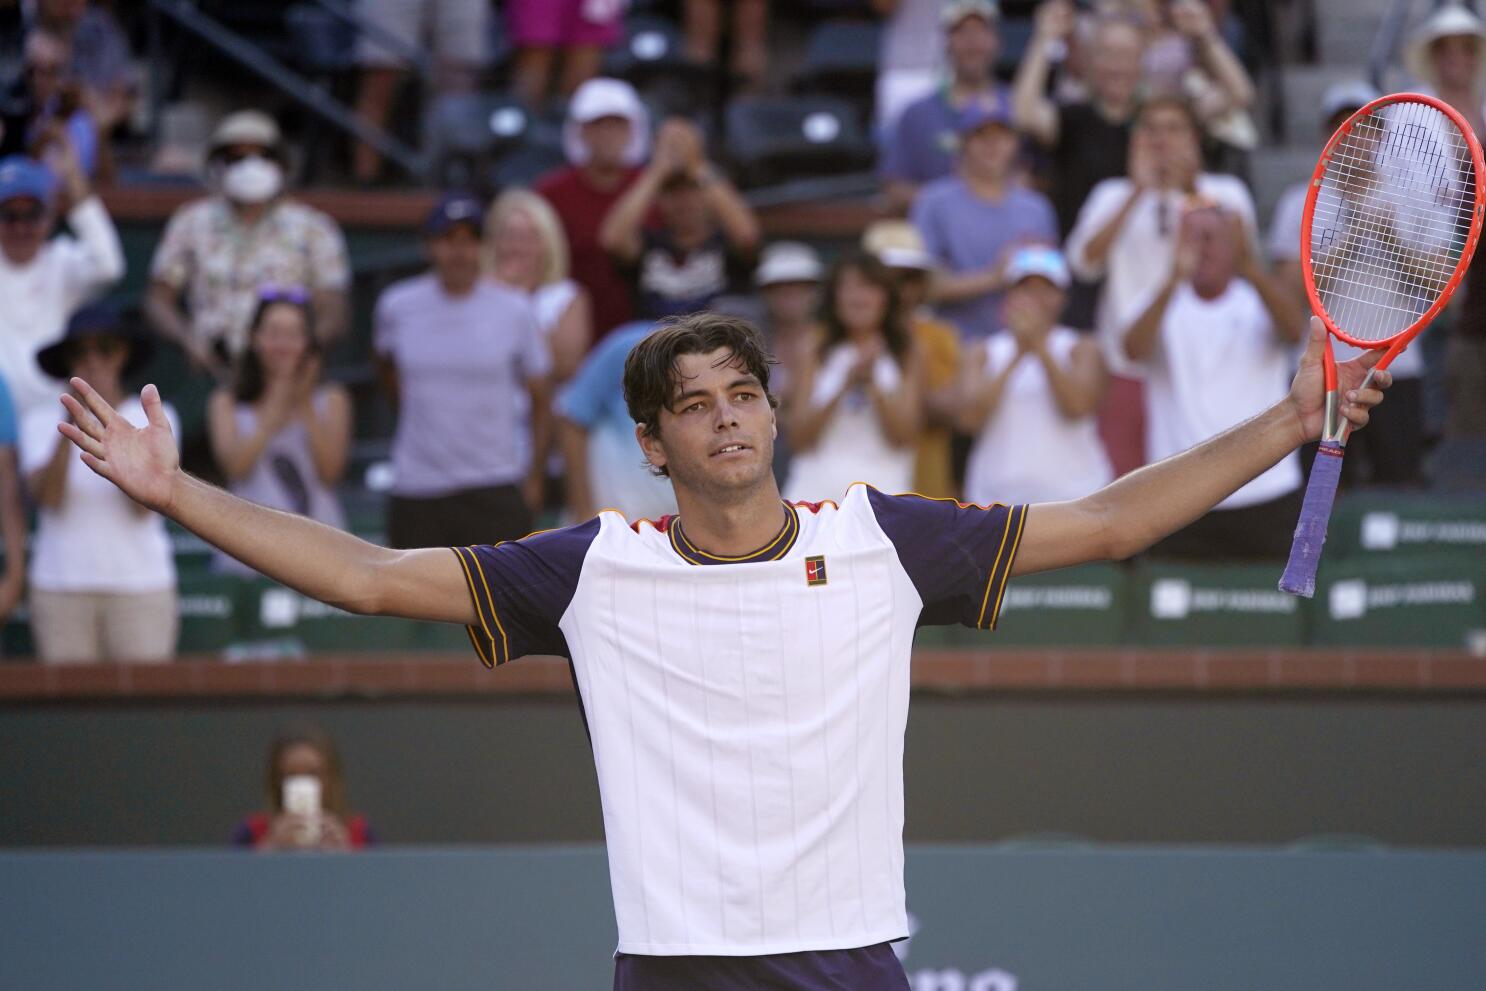 LIVE RANKINGS. Taylor Fritz to be the American no.1 after Indian Wells  if - Tennis Tonic - News, Predictions, H2H, Live Scores, stats